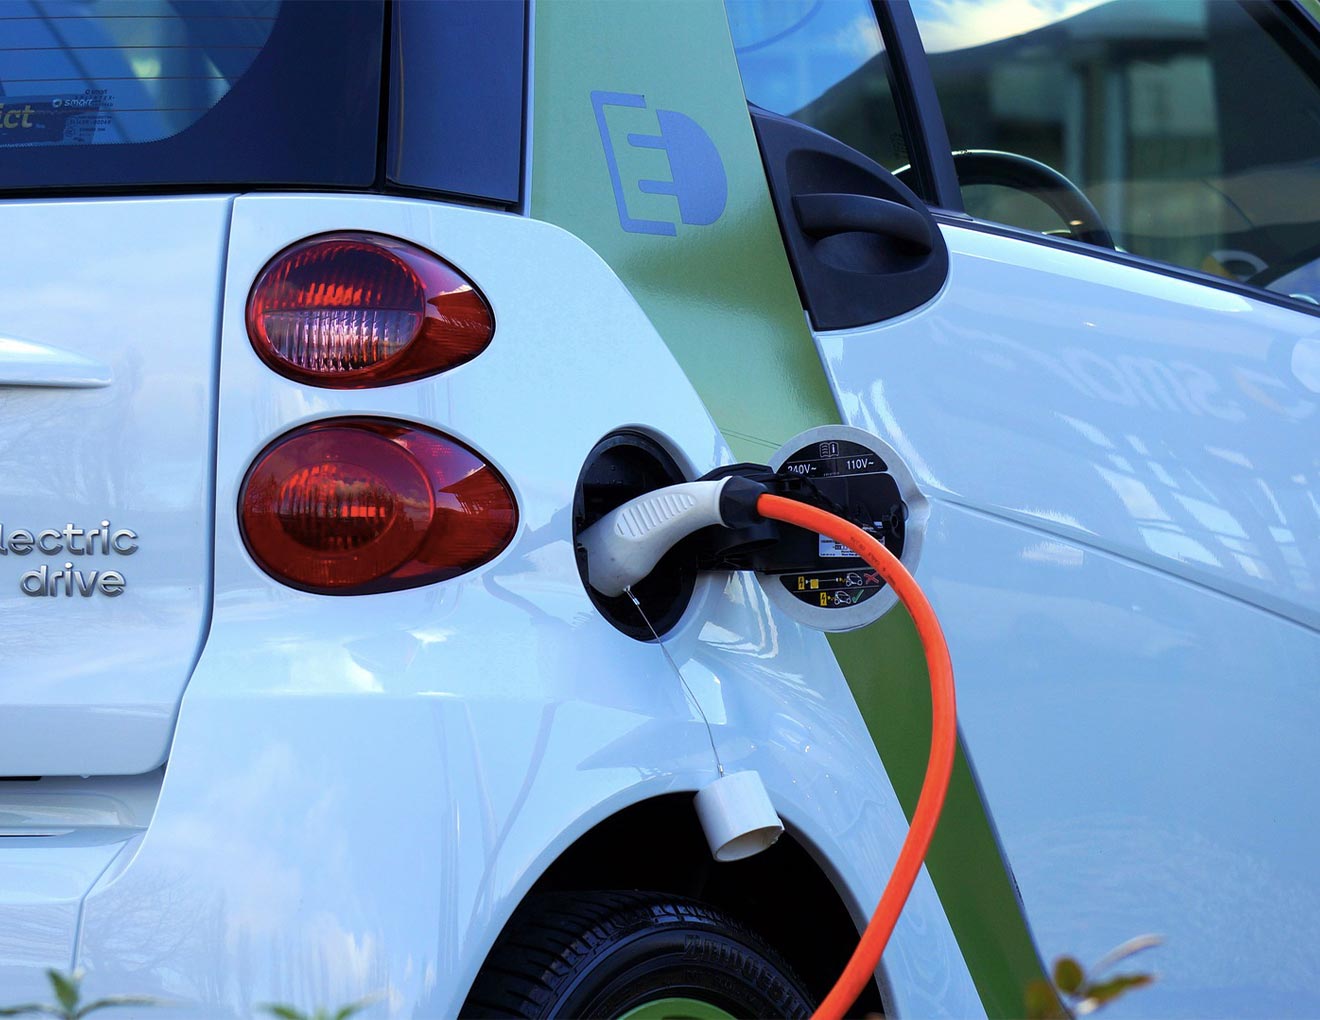 Covid-19 Pandemic Acts As A Catalyst To Accelerate The Adoption Of Electric Vehicles In The Last-Mile Delivery Sector